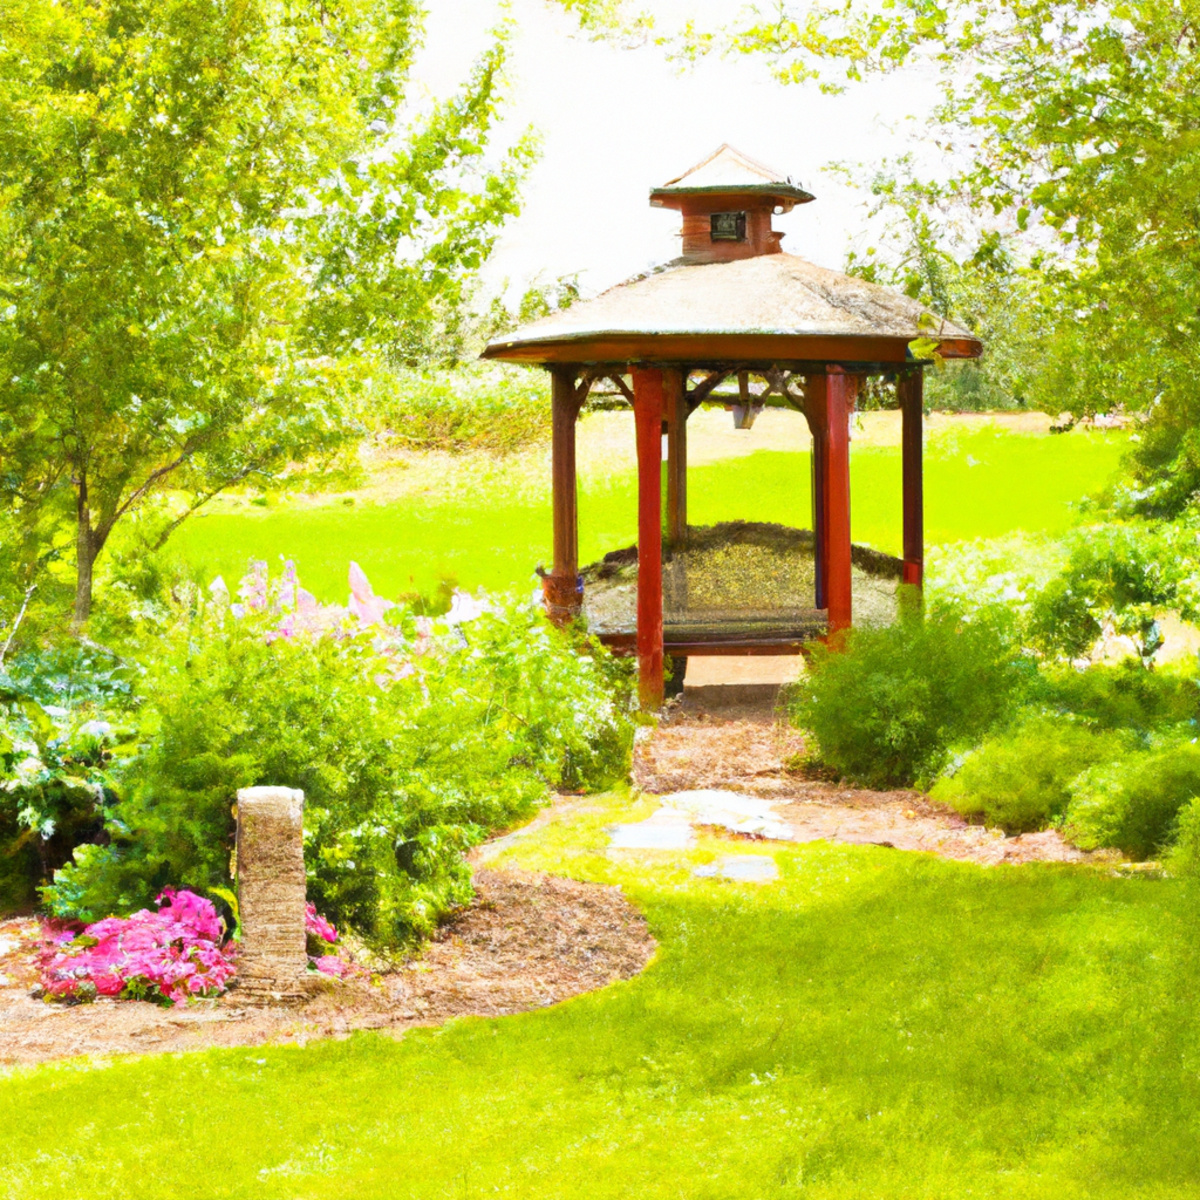 Tranquil park with winding pathway, gazebo, and blooming flowers, promoting heart-healthy lifestyle and nature's role - Loeys-Dietz Syndrome